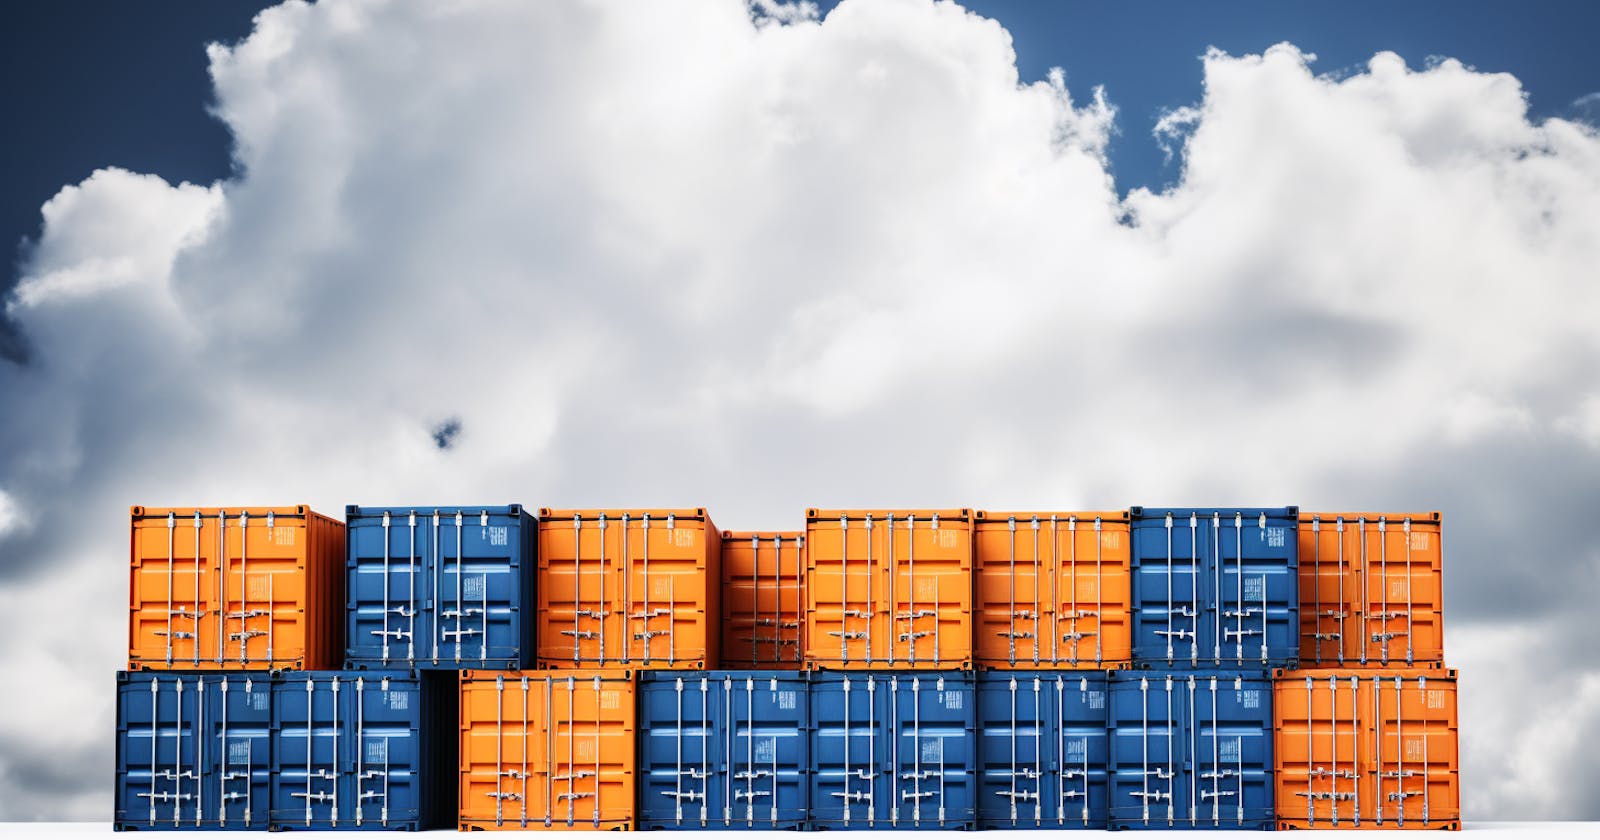 How to Run Containers in AWS